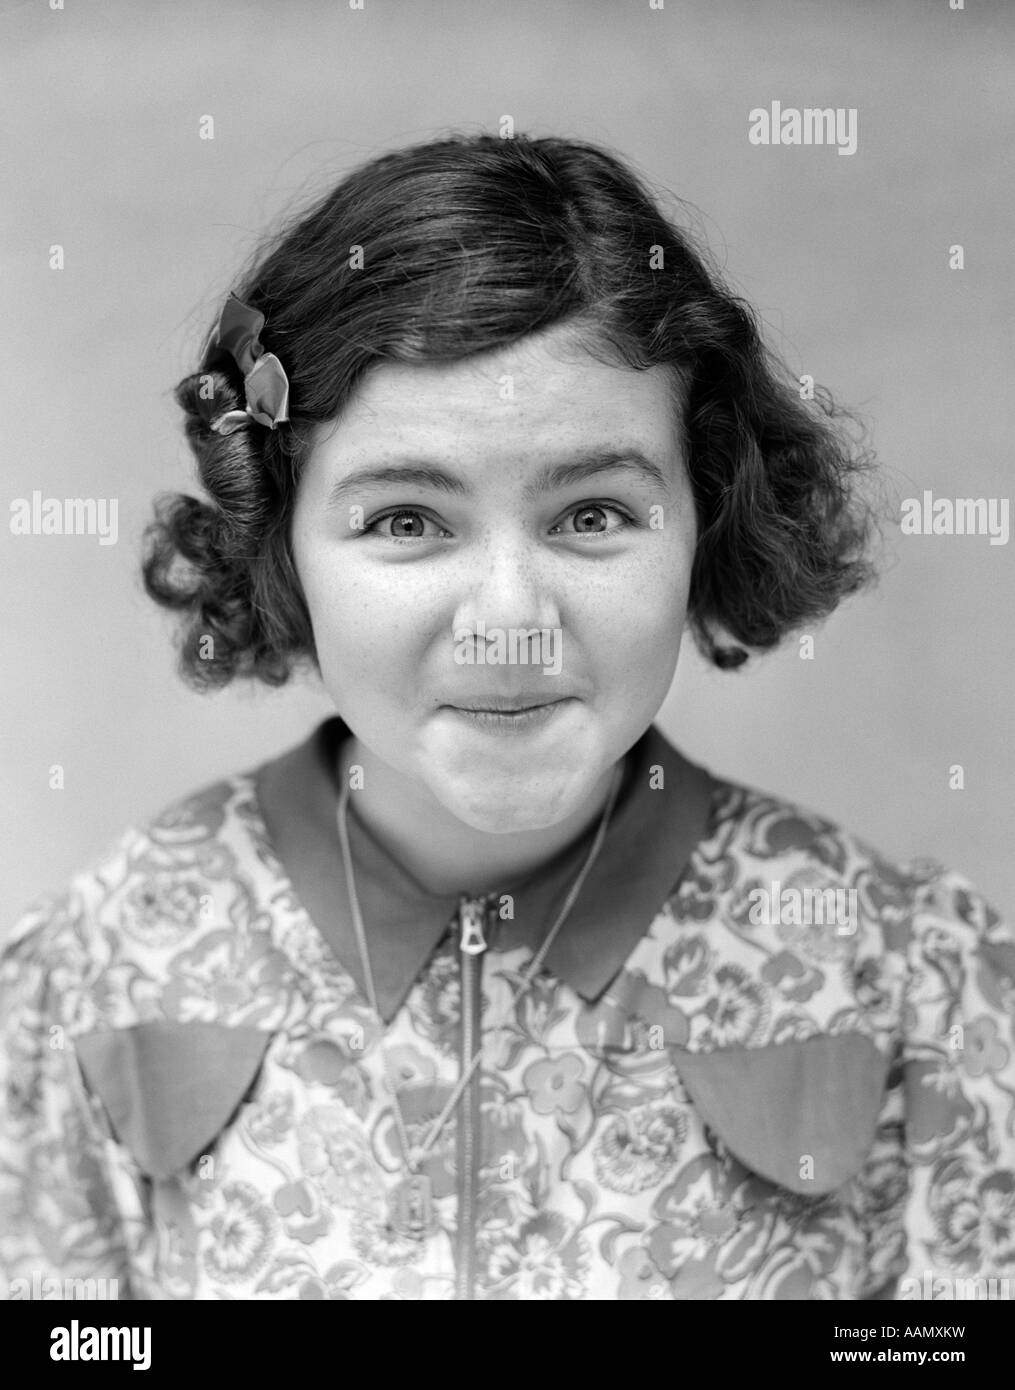 1930s PORTRAIT WIDE-EYED GIRL SMILING AT CAMERA LIPS MOUTH CLOSED Stock Photo